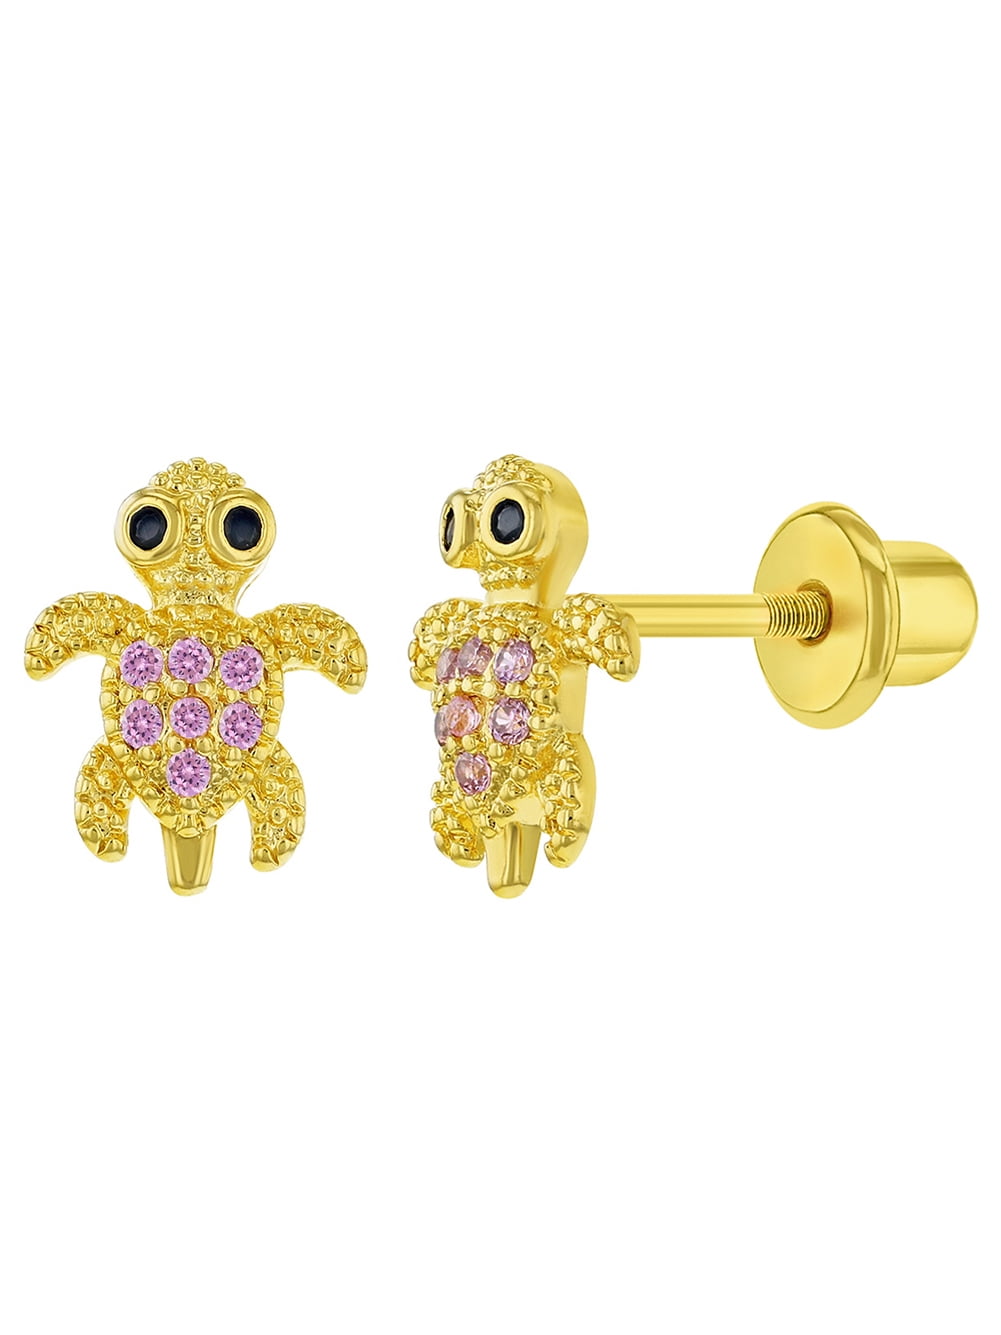 Details about   925 Sterling Silver Pink Cubic Zirconia Owl Screw Back Animal Earrings for Girls 